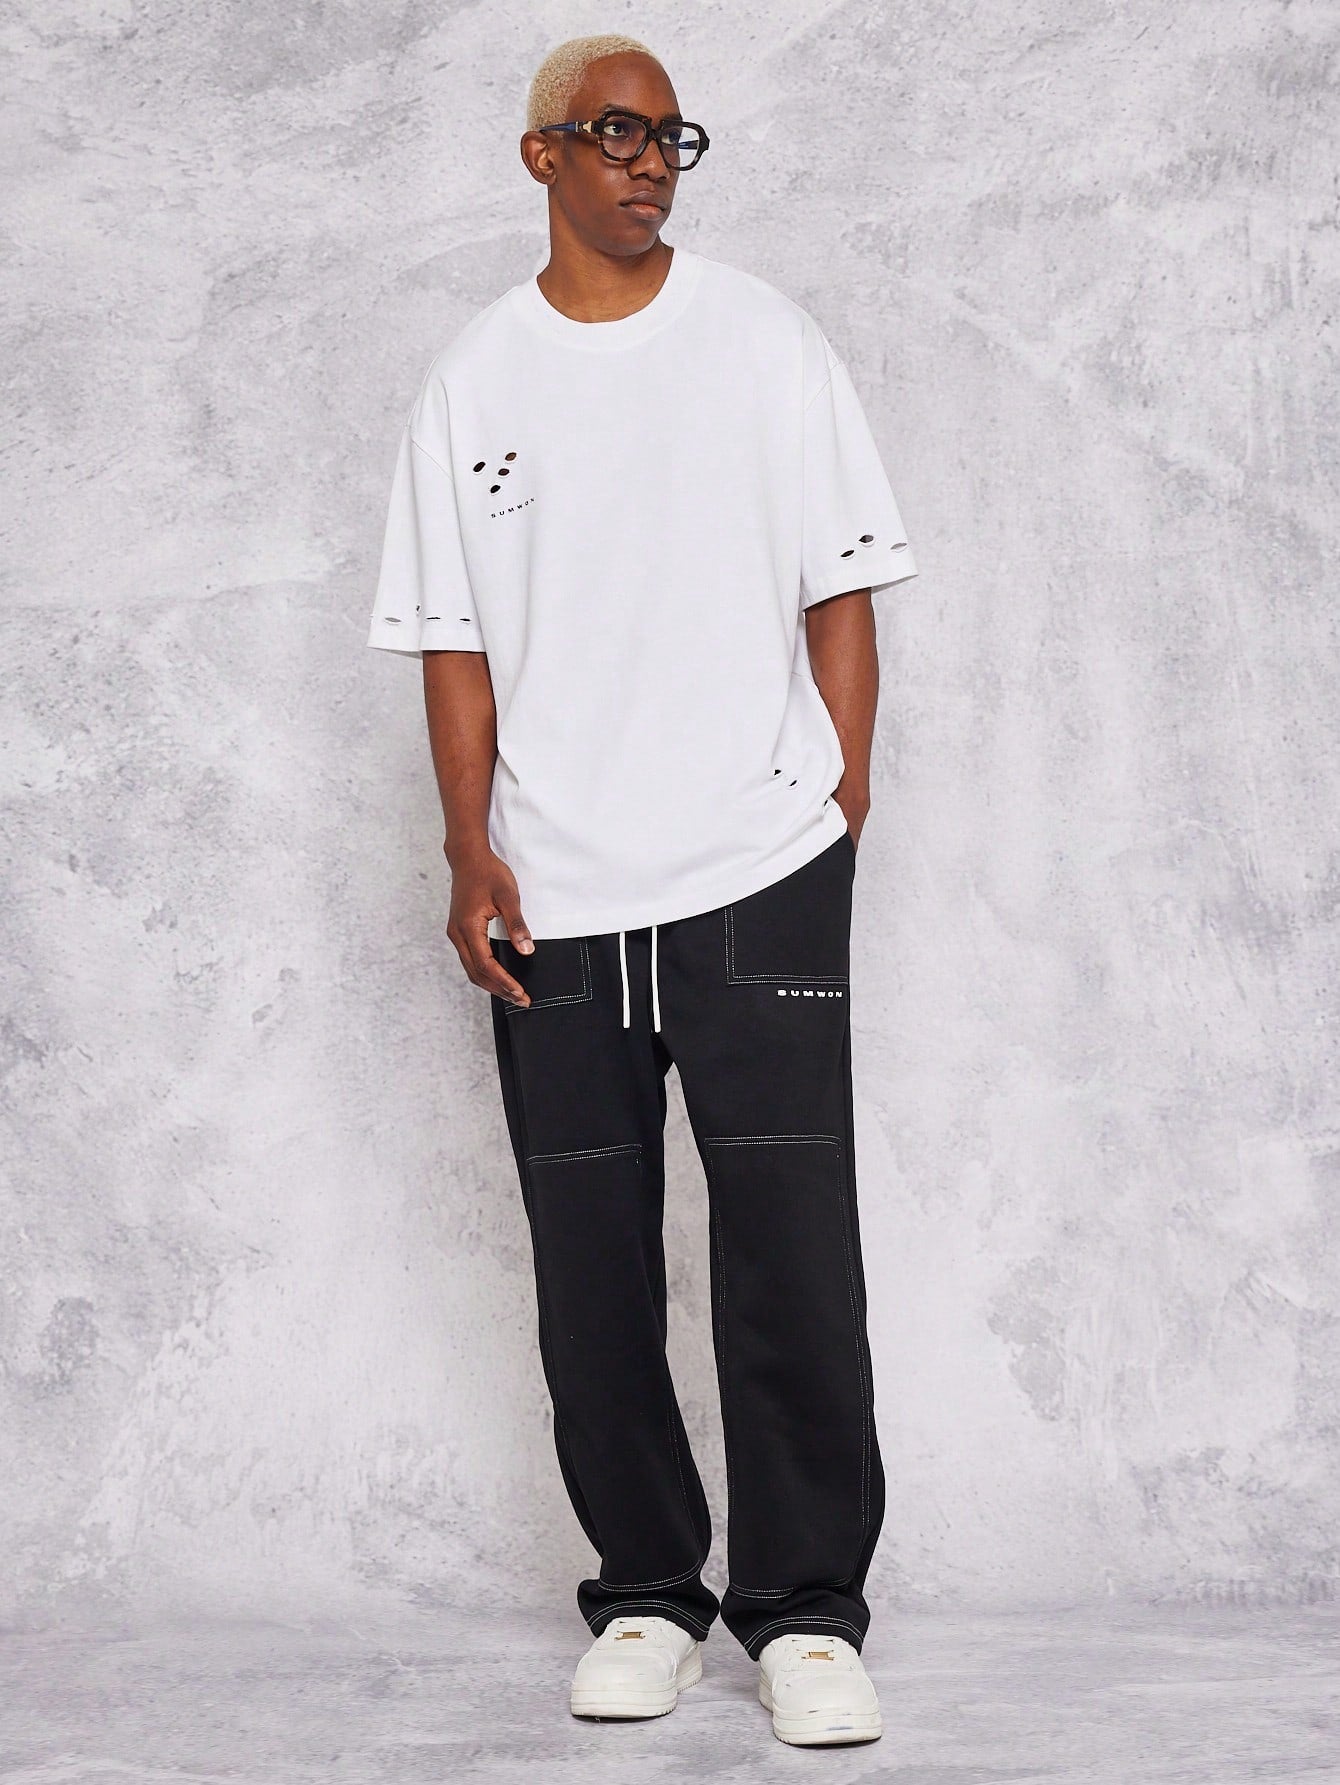 Heavyweight Oversized Tee With Distressed Holes And Print